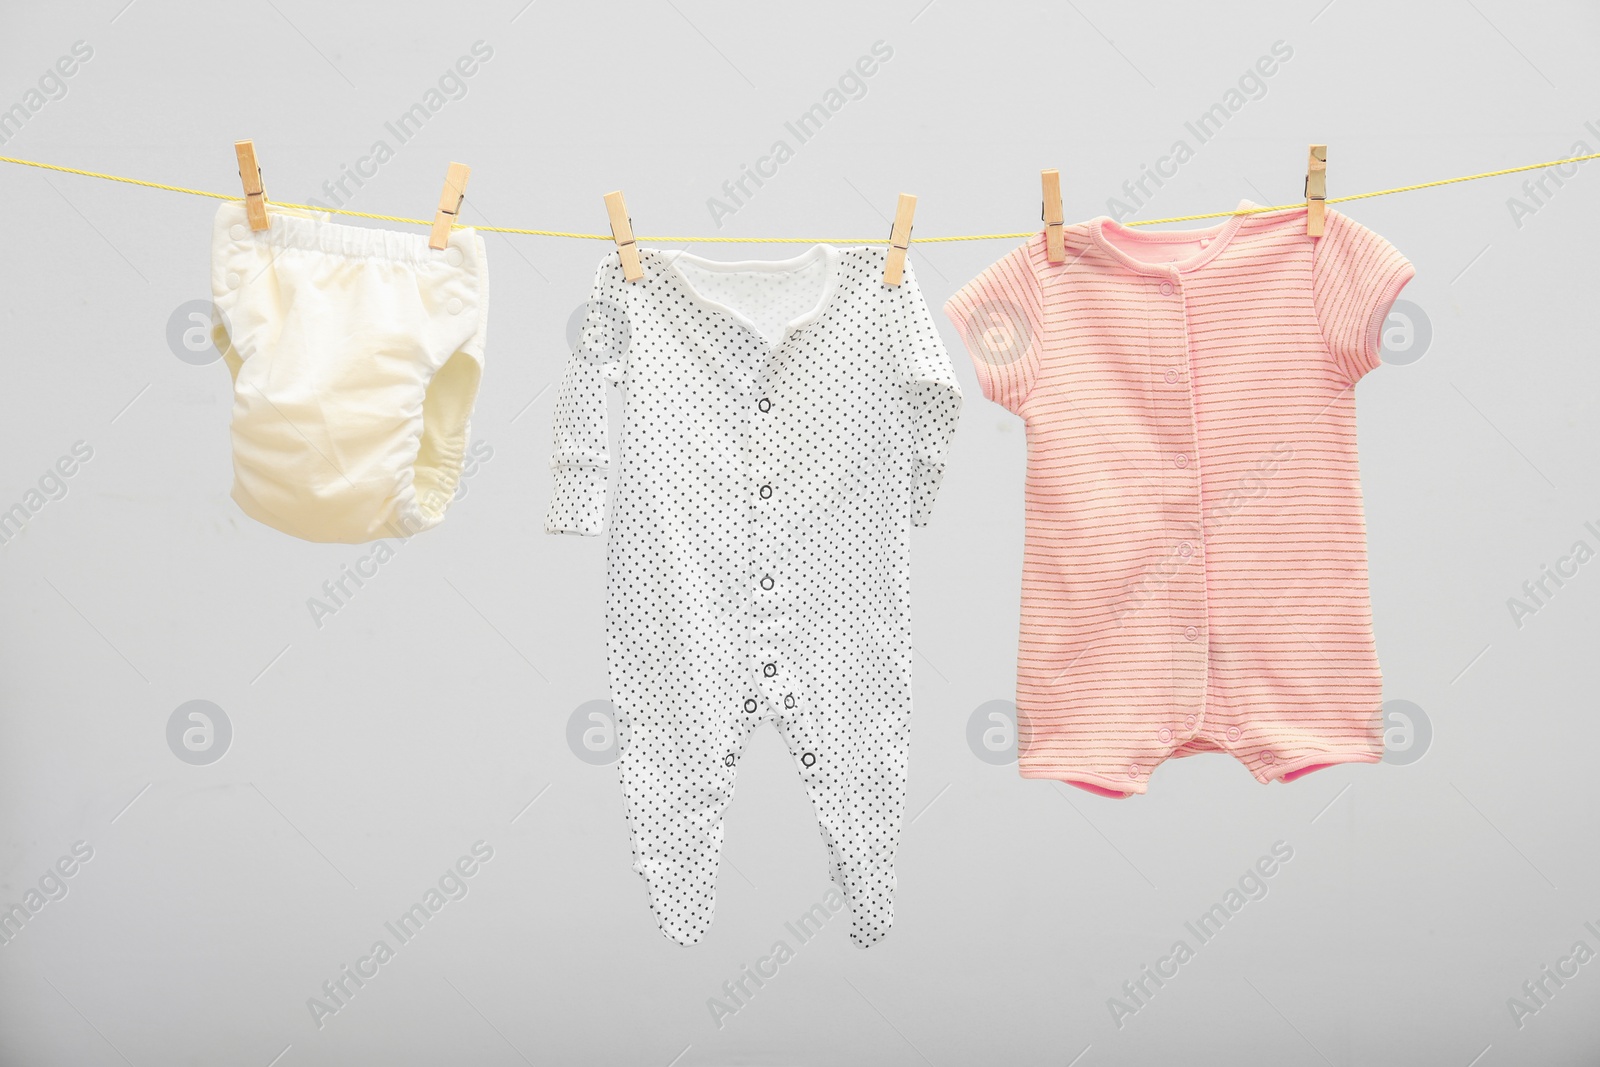 Photo of Children's clothes on laundry line against light background